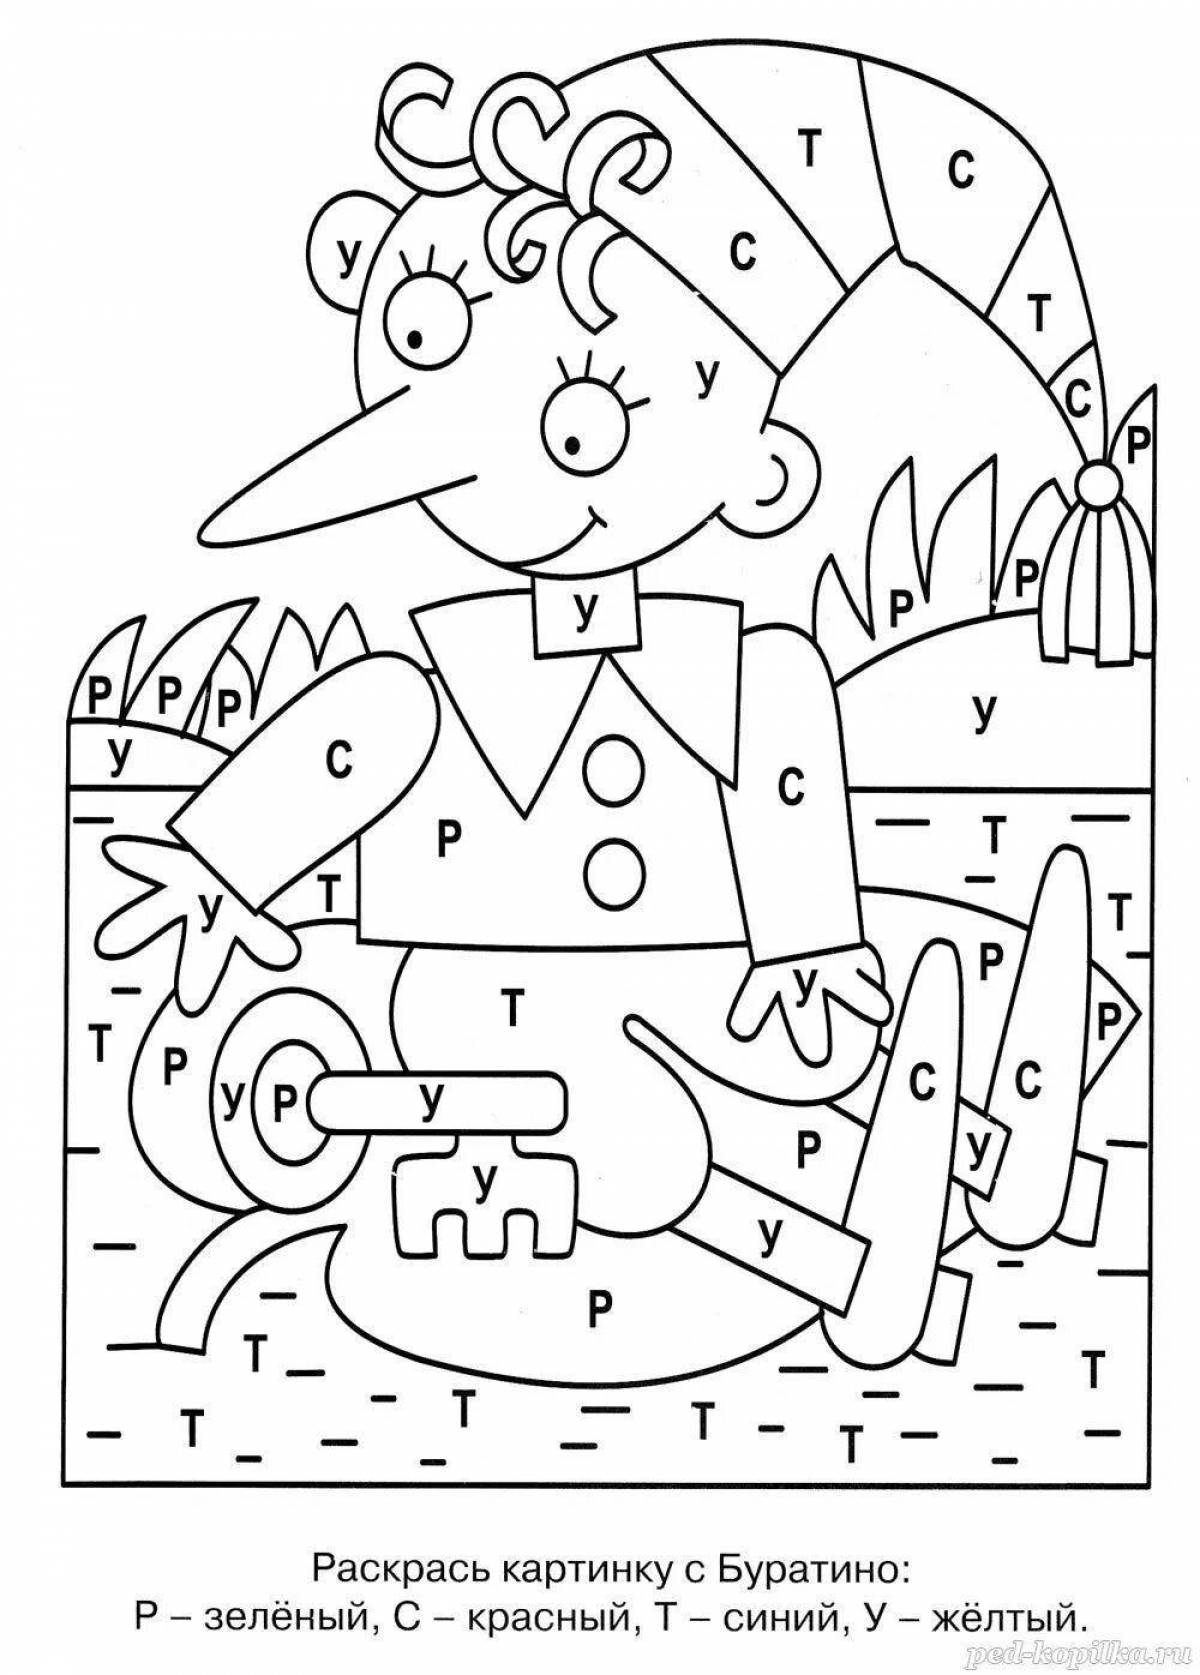 Exciting coloring letter c